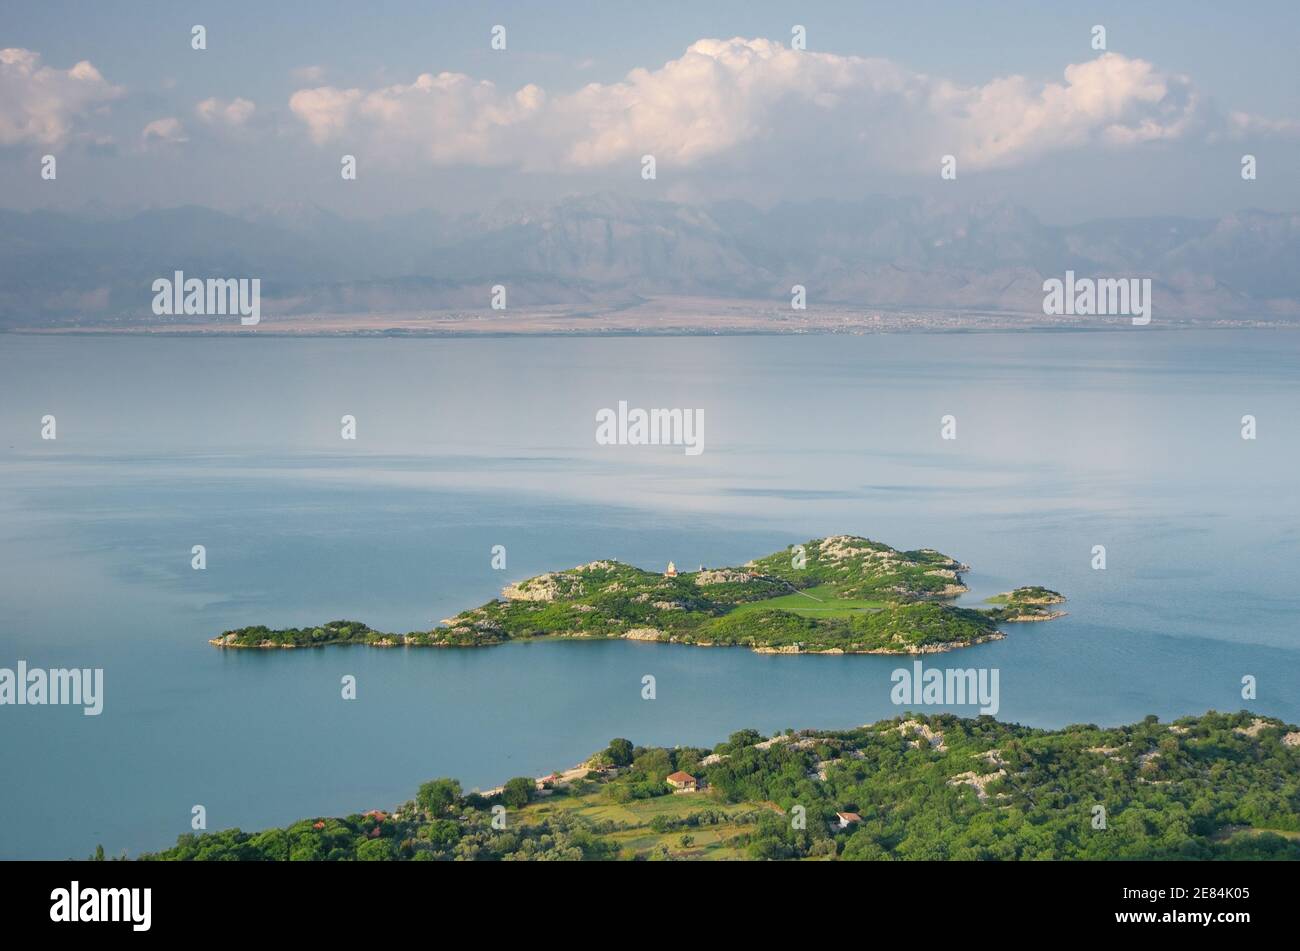 Beska Island on Lake Skadar National Park, Montenegro. There are two churches built on the island. Stock Photo